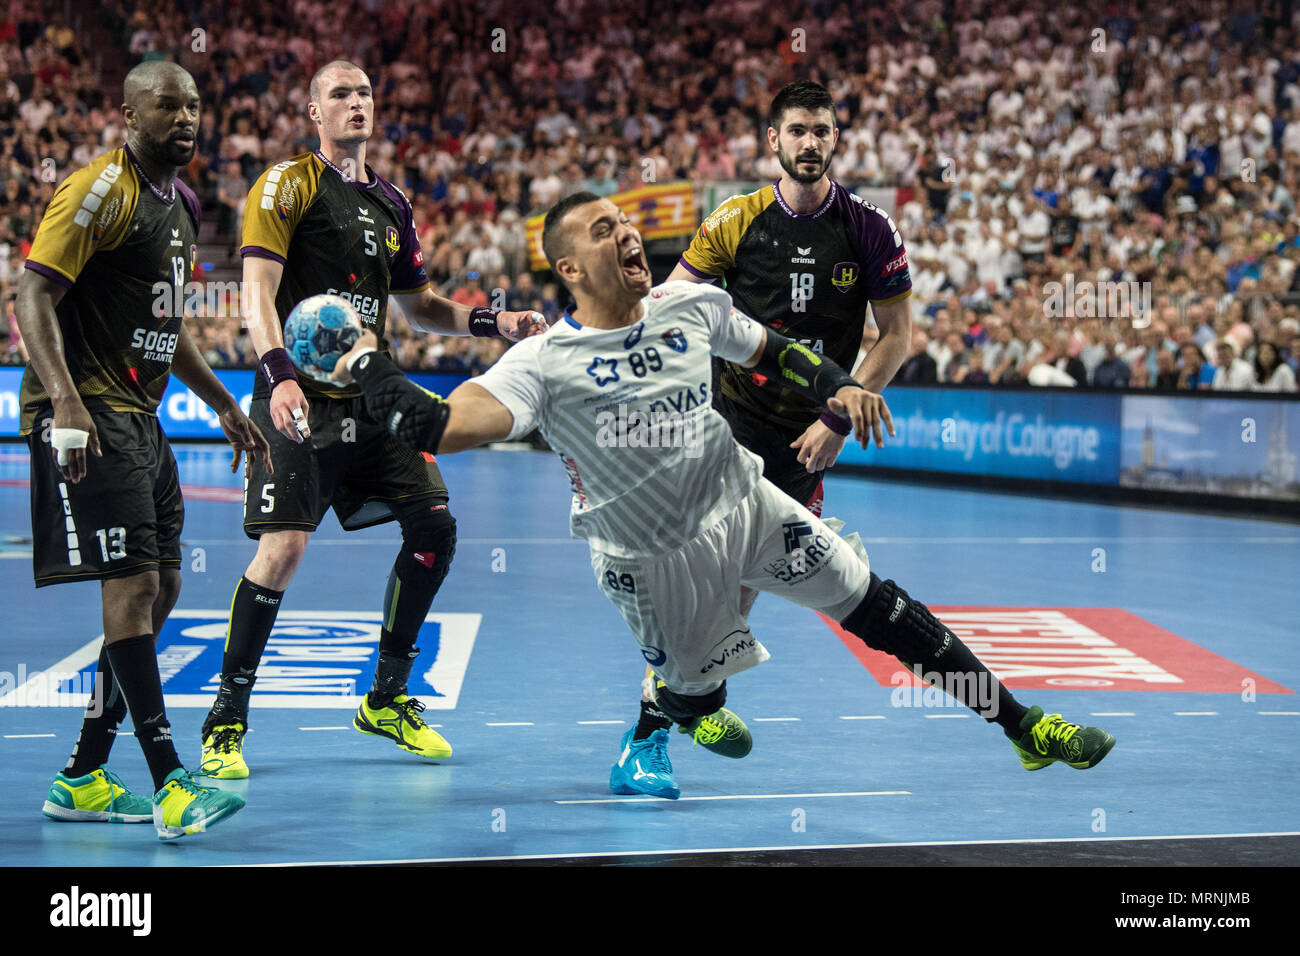 27 May 2018, Germany, Cologne: Handball Champions League final, HBC Nantes  vs Montpellier HB at the Lanxess Arena: Mohamed Mamdouh of Montpellier  throws for goal. Photo: Federico Gambarini/dpa Stock Photo - Alamy